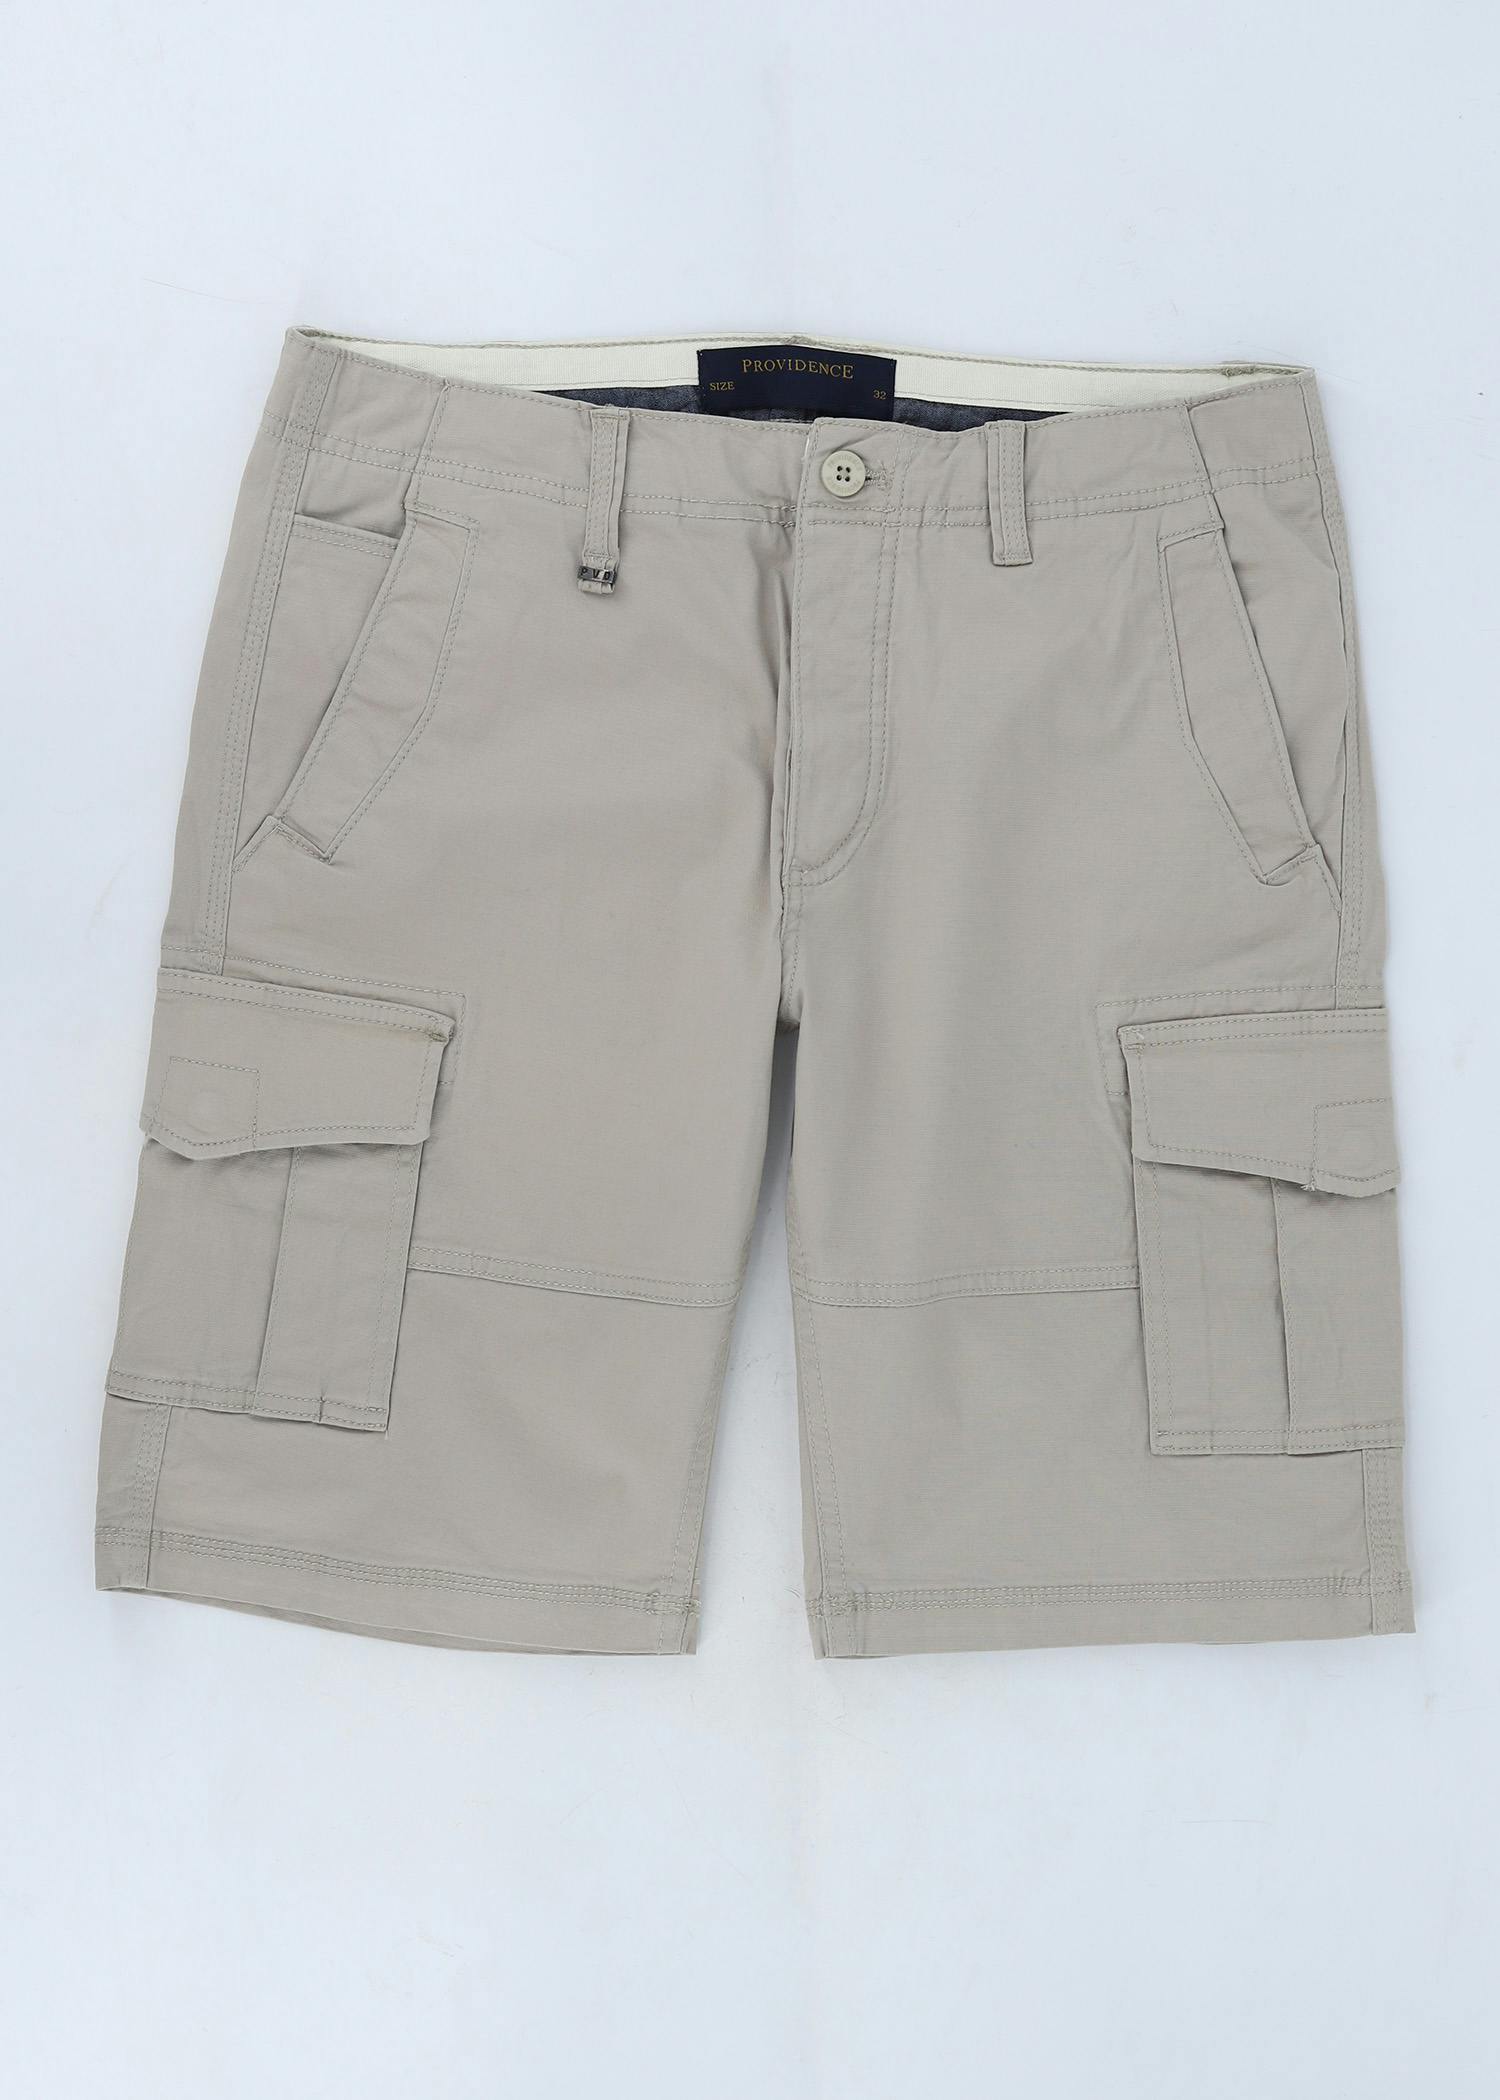 vulture ii cargo short sand color front view